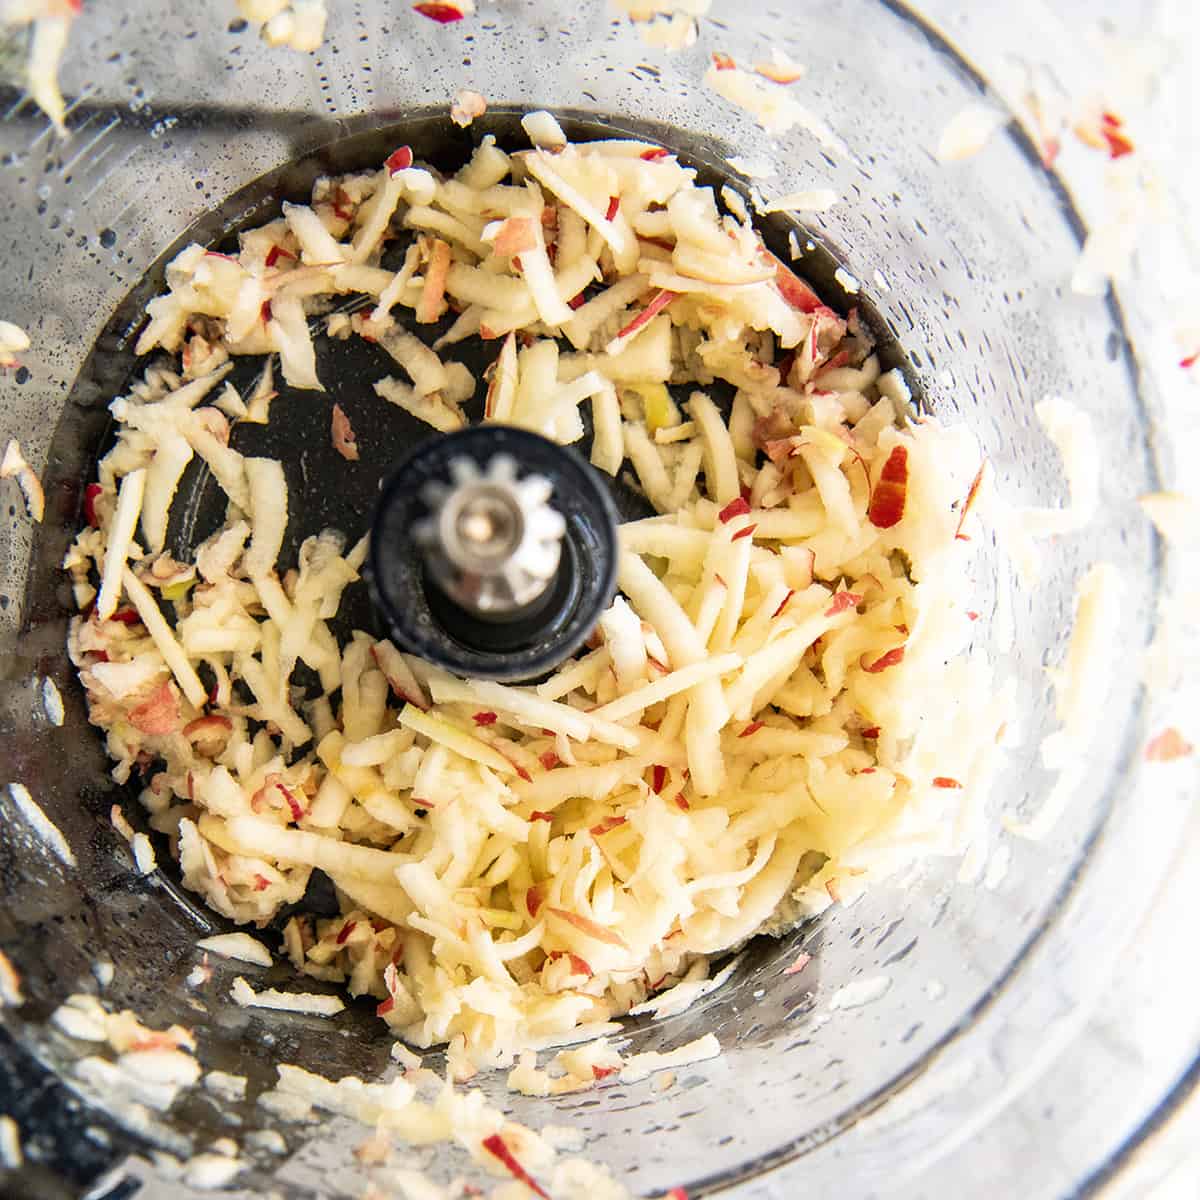 apples shred with the large shred disc in a Vitamix food processor